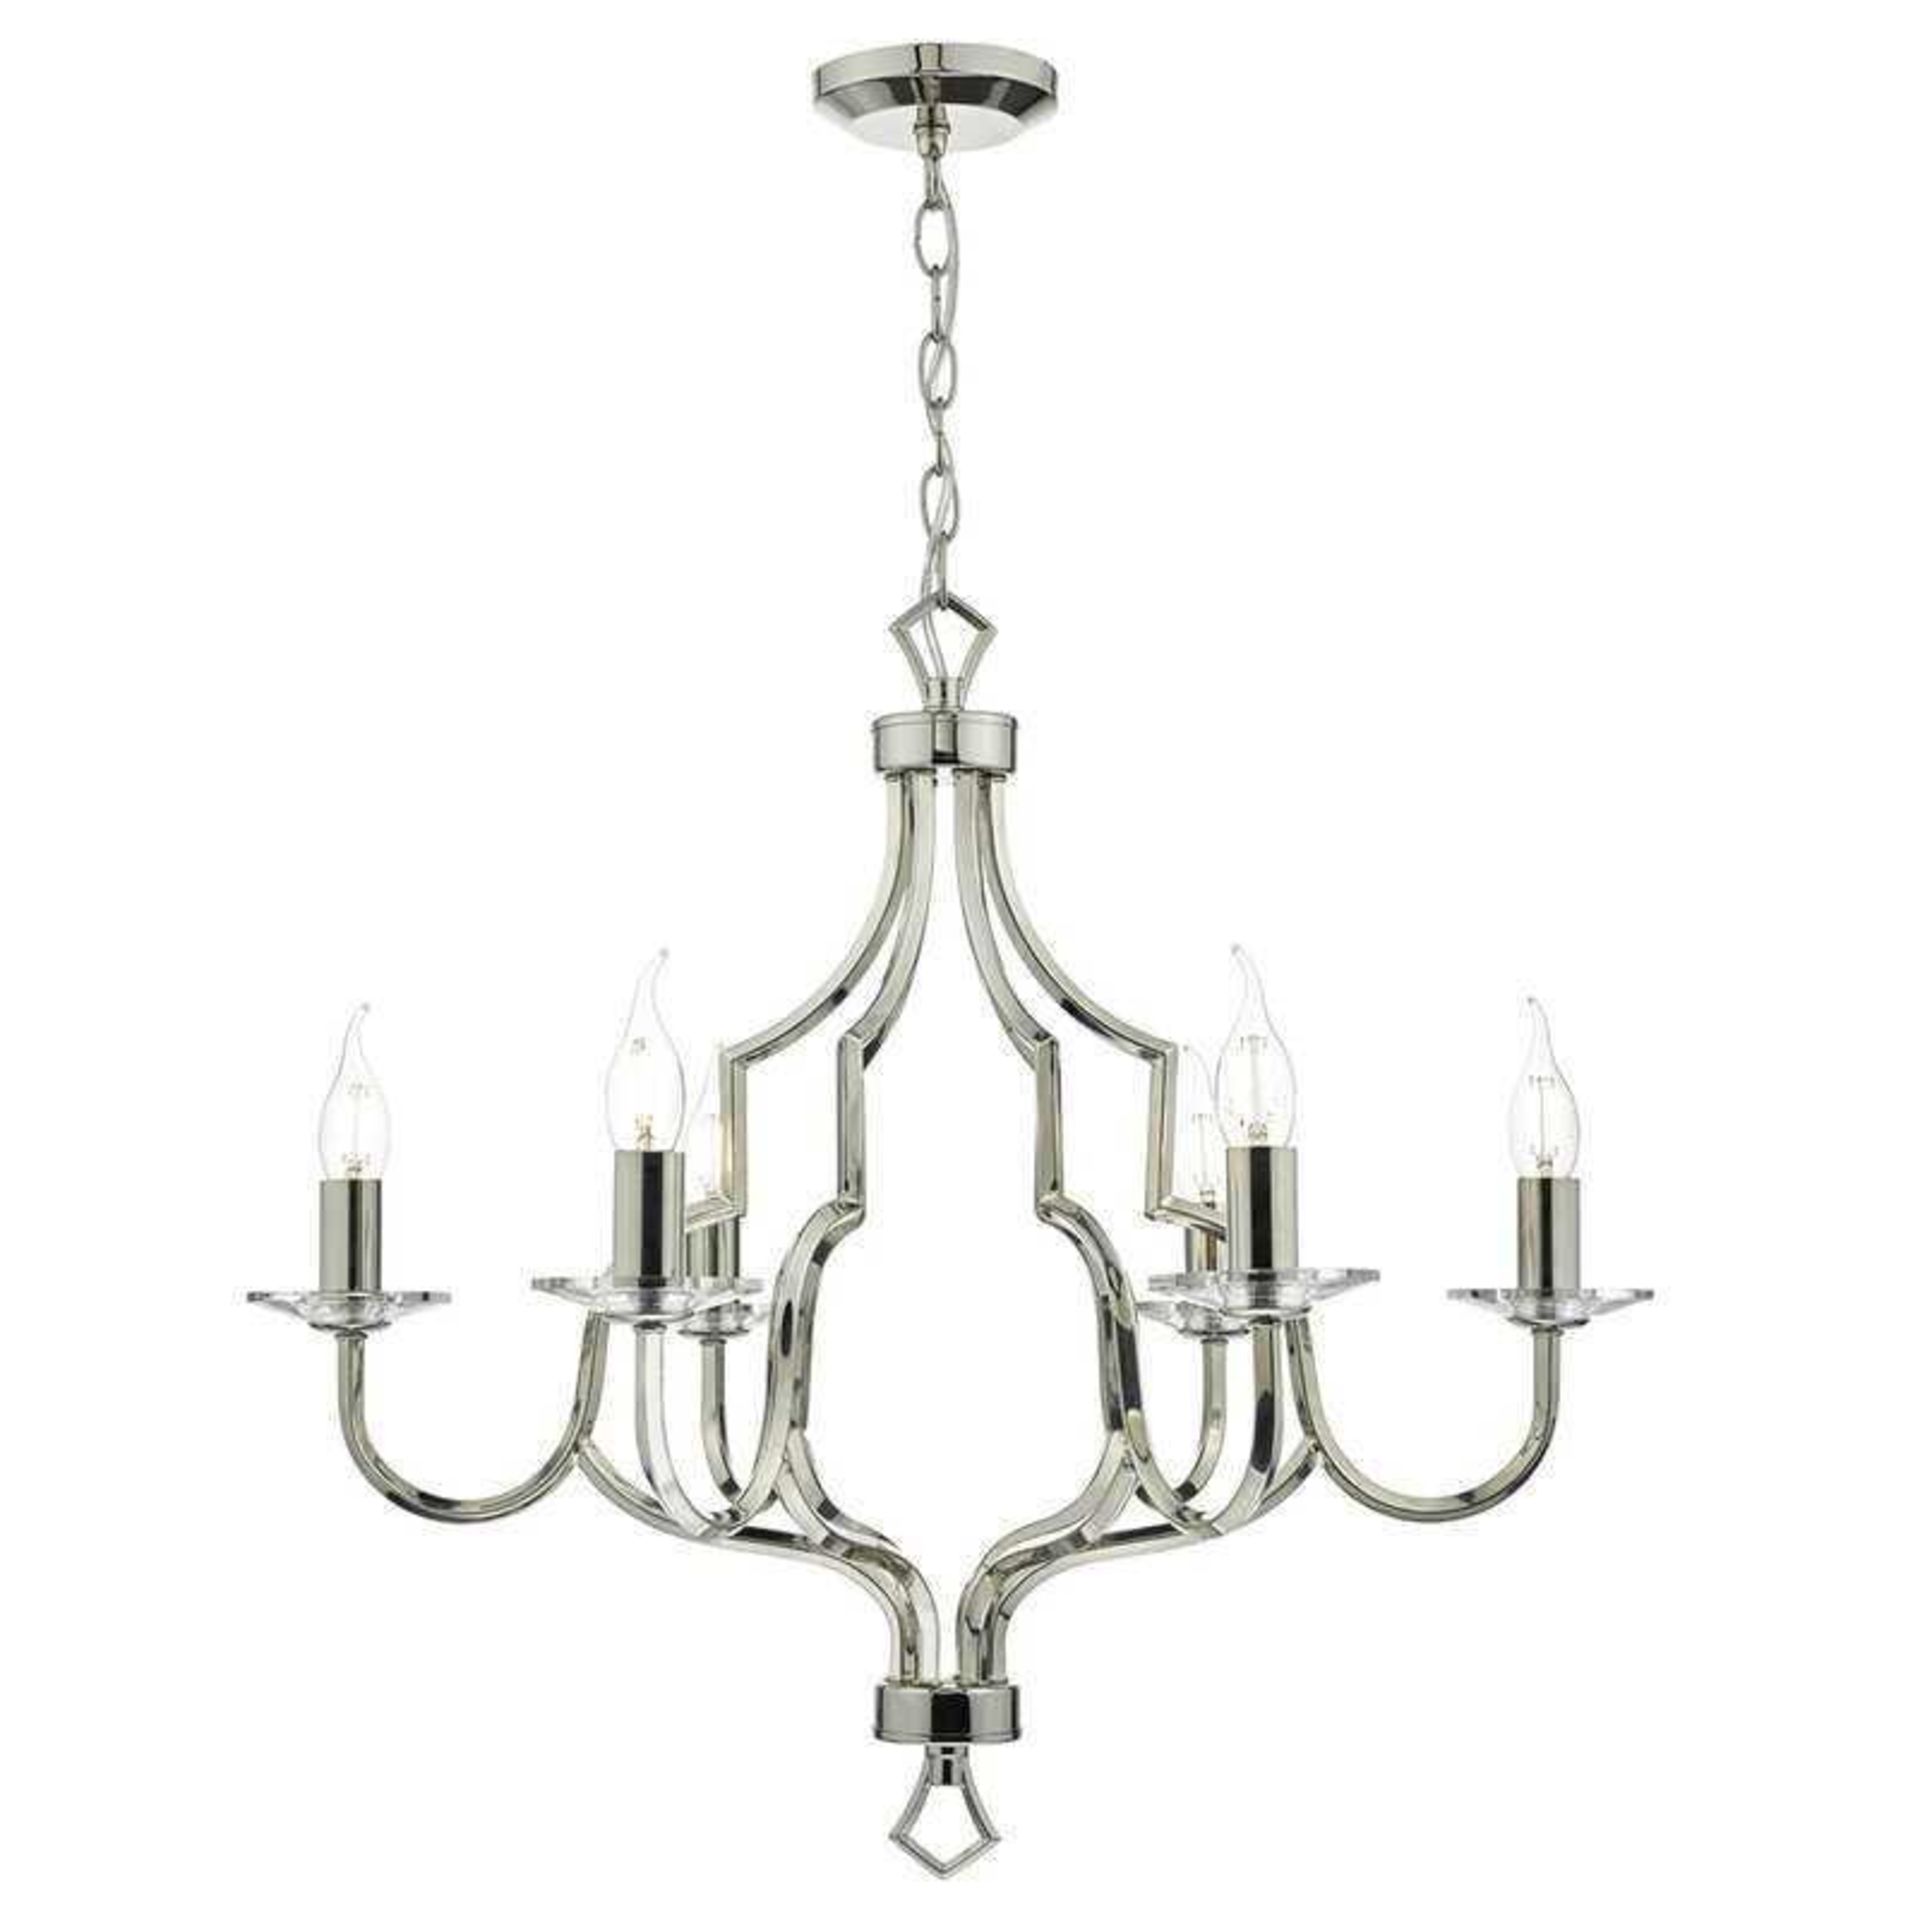 RRP £250 Lot To Contain 1X Boxed Heckart 6-Light Candle-Style Chandelier(Sp)